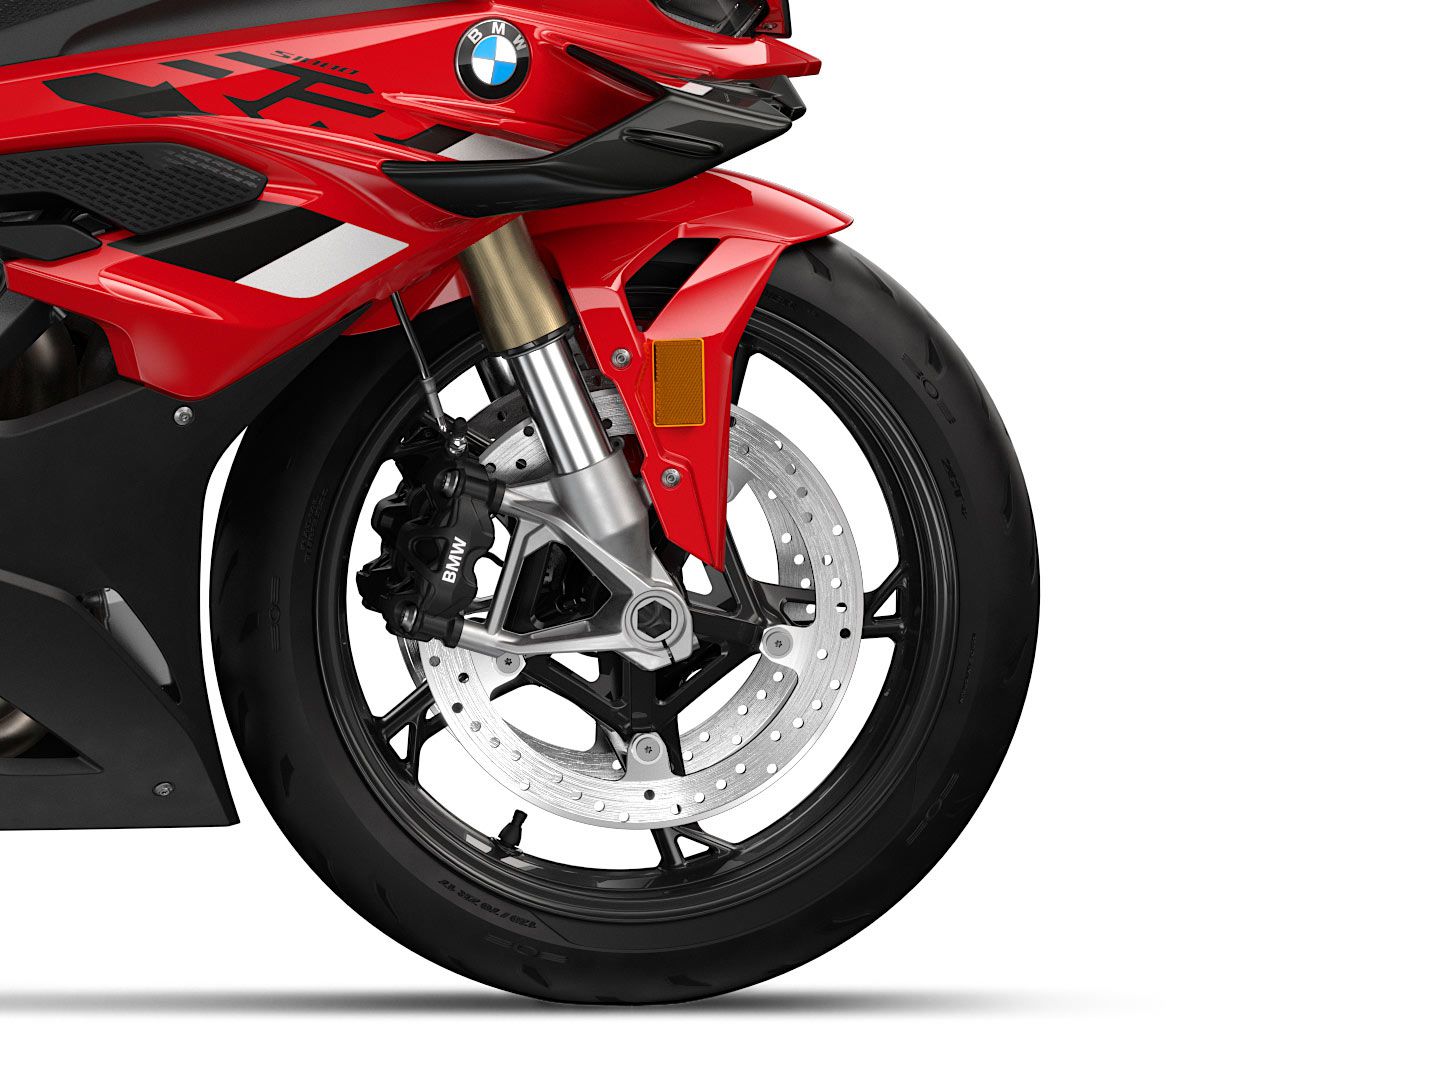 Four-piston calipers bite on 320mm steel discs. Bigger news is that Brake Slide Assist has been added to the ABS Pro system. Brake Slide Assist enables the rider to set a specific drift angle while sliding into corners.